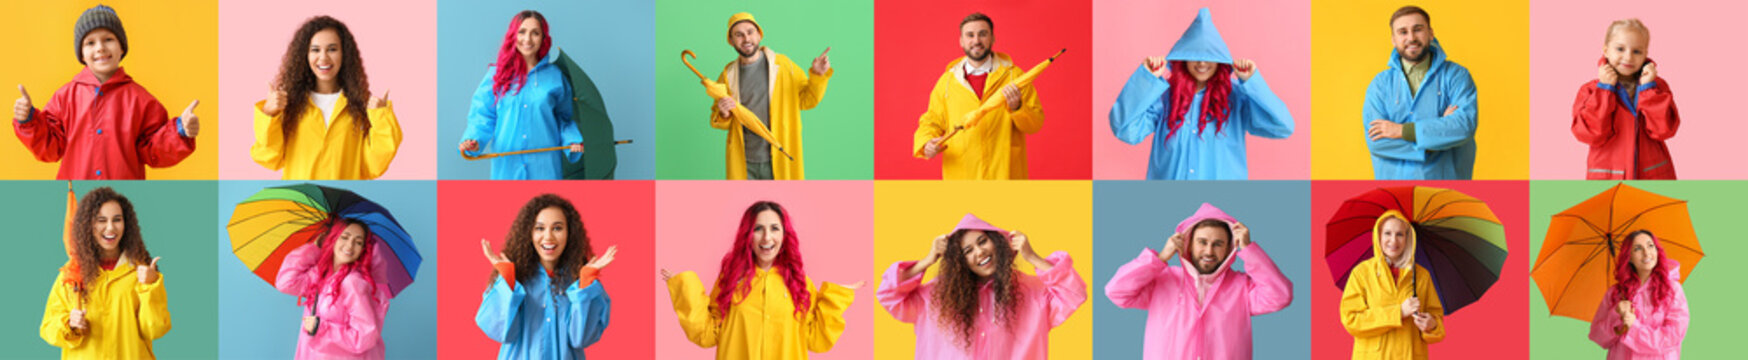 Collage with many different people in raincoats on colorful background